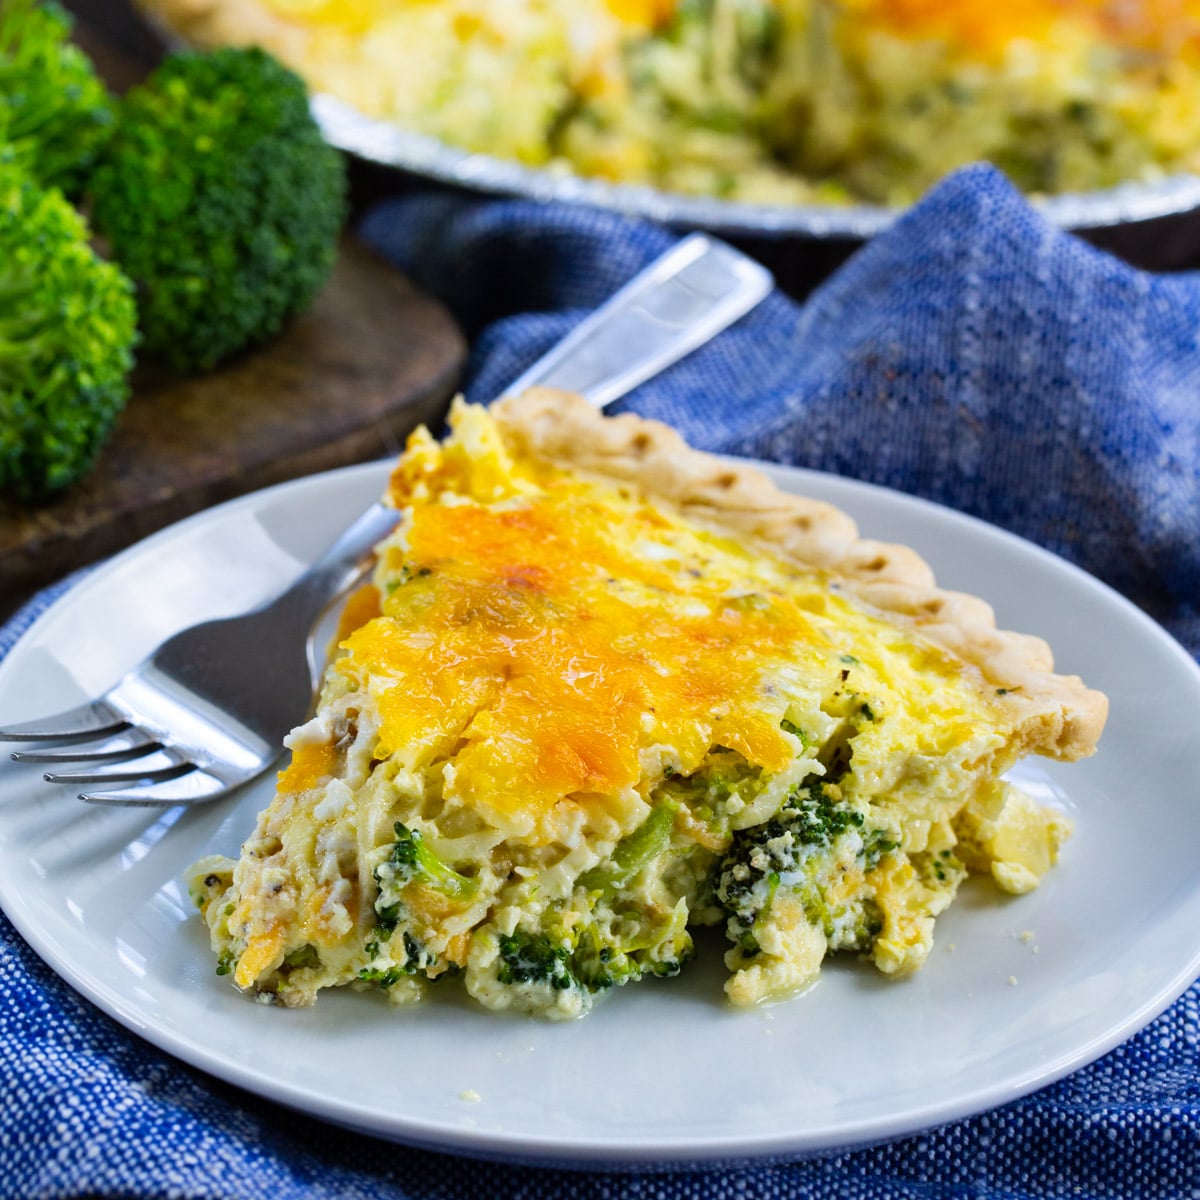 Slice of Broccoli Quiche connected  a plate.